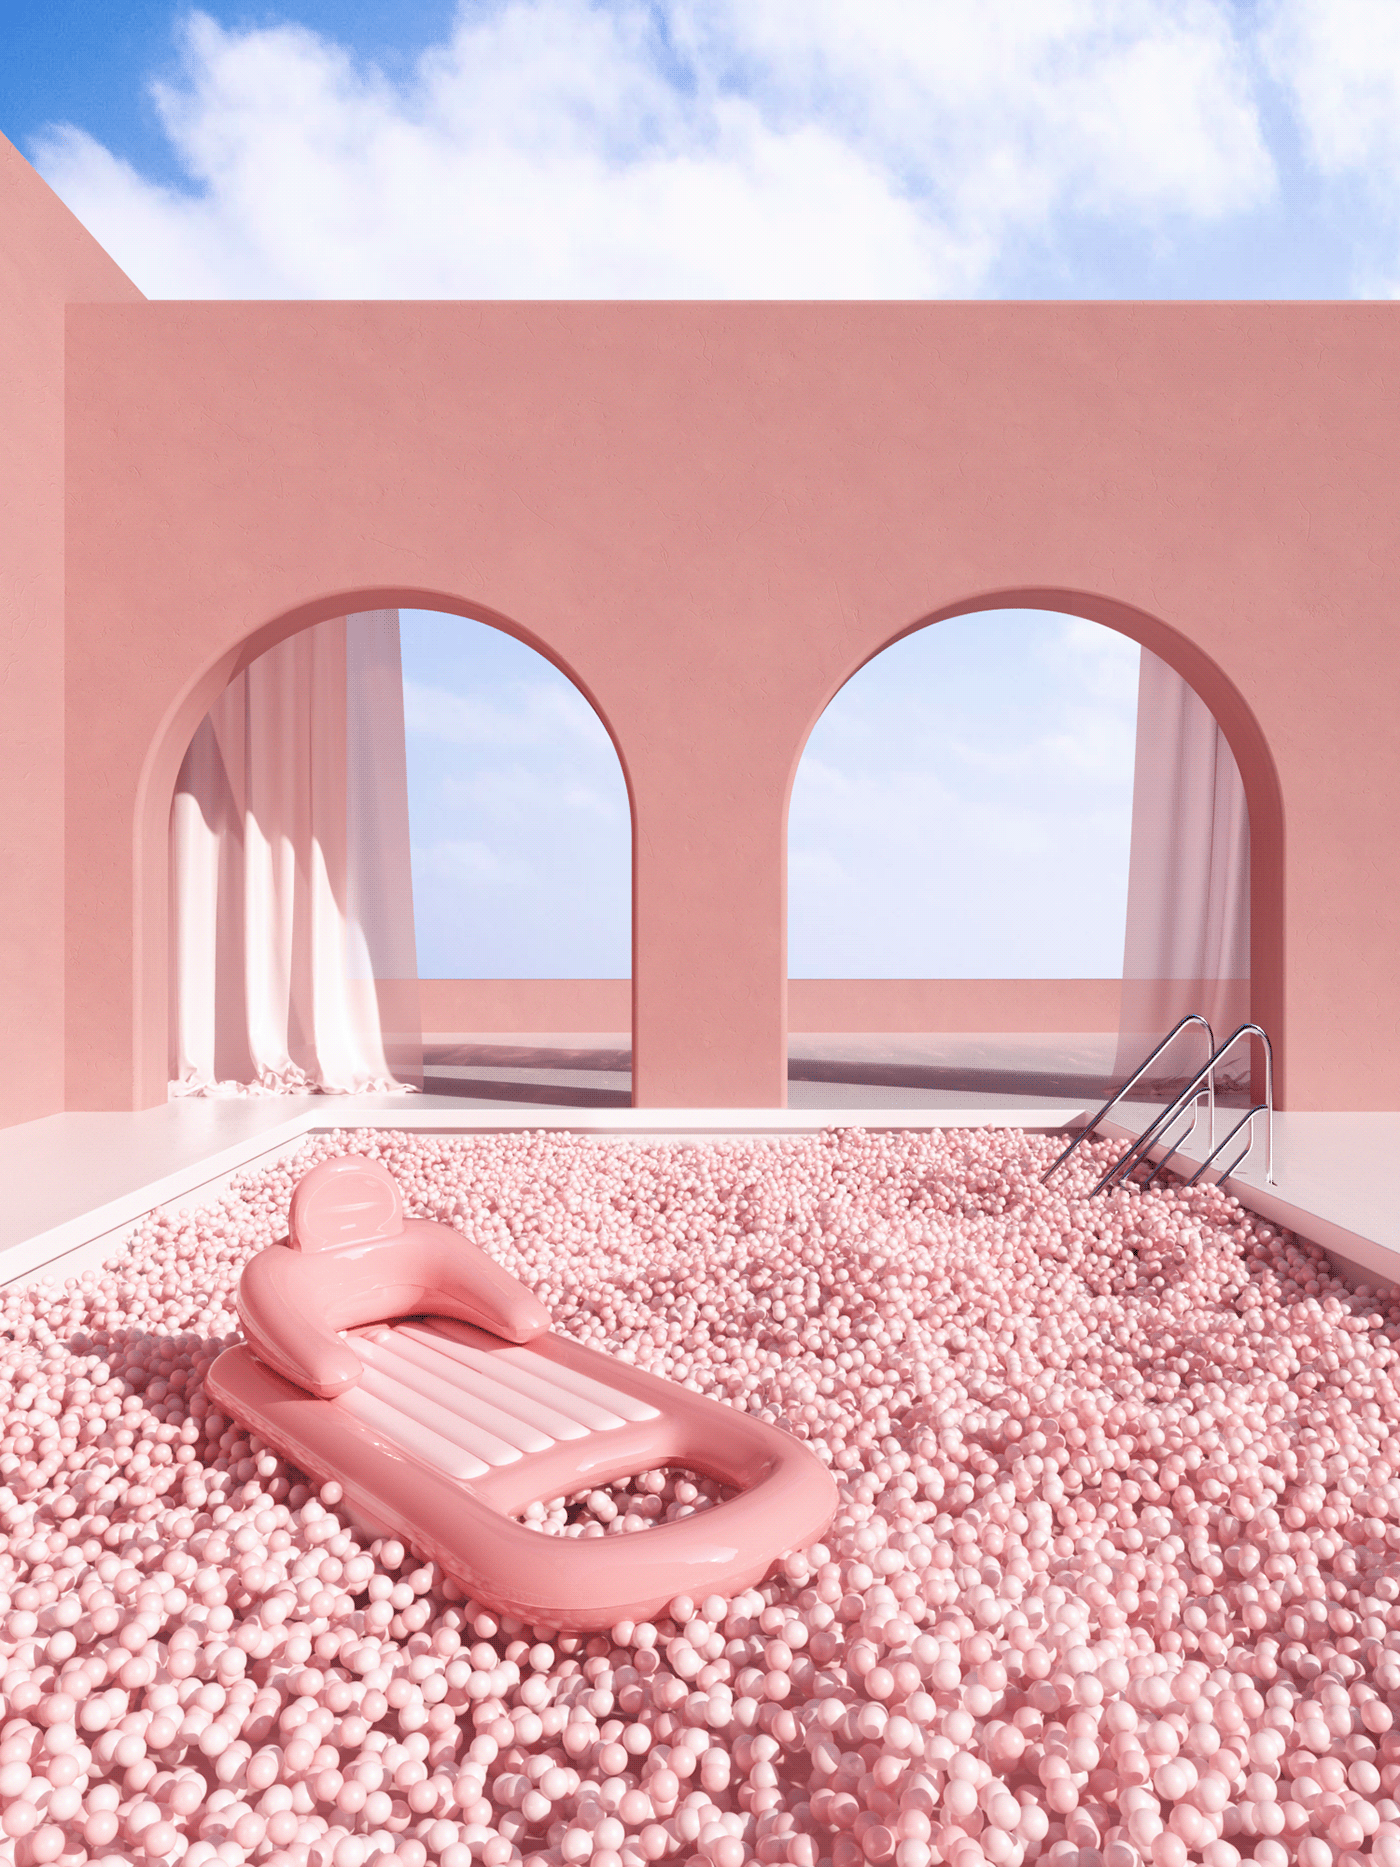 3D minimal surreal abstract pastel Interior architecture aesthetic pink modern